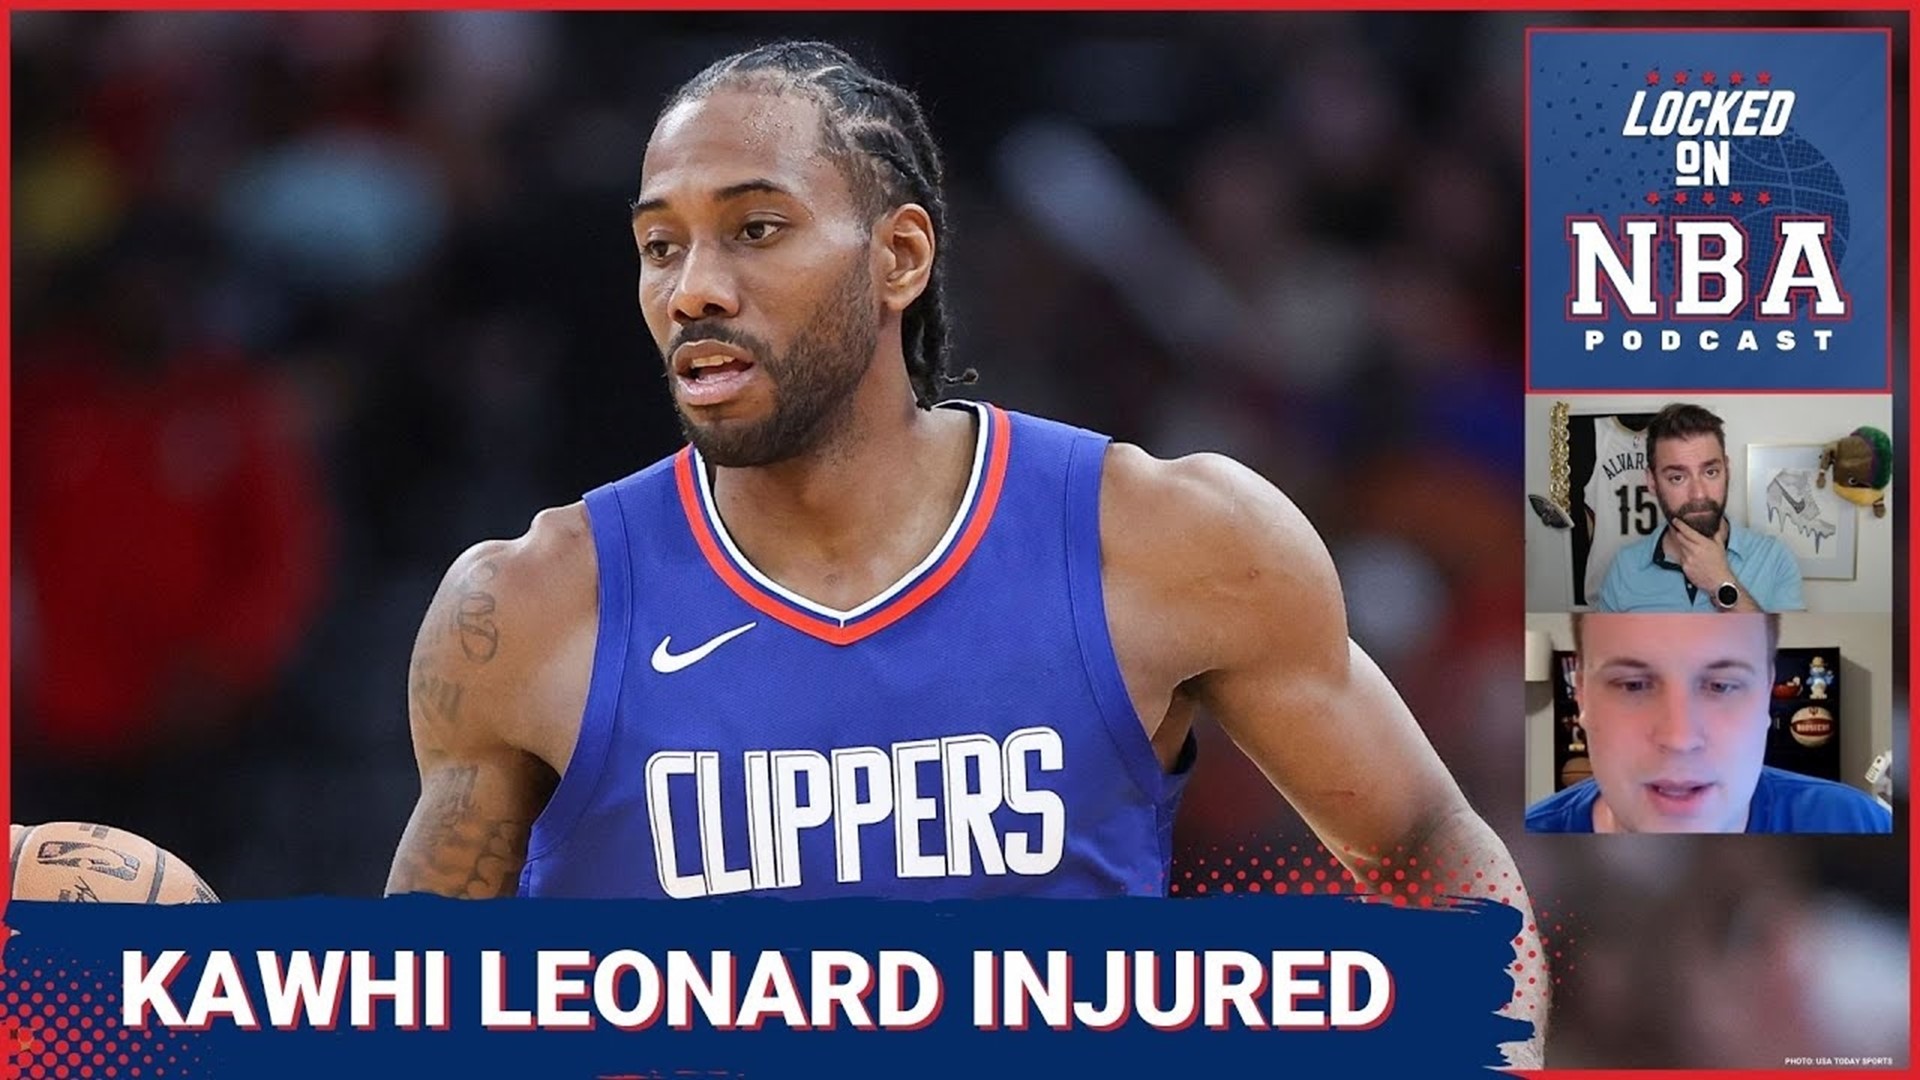 In a massive game with playoff implications the Kawhi Leonard not only left the game but the arena with thoracic (back) spasms.